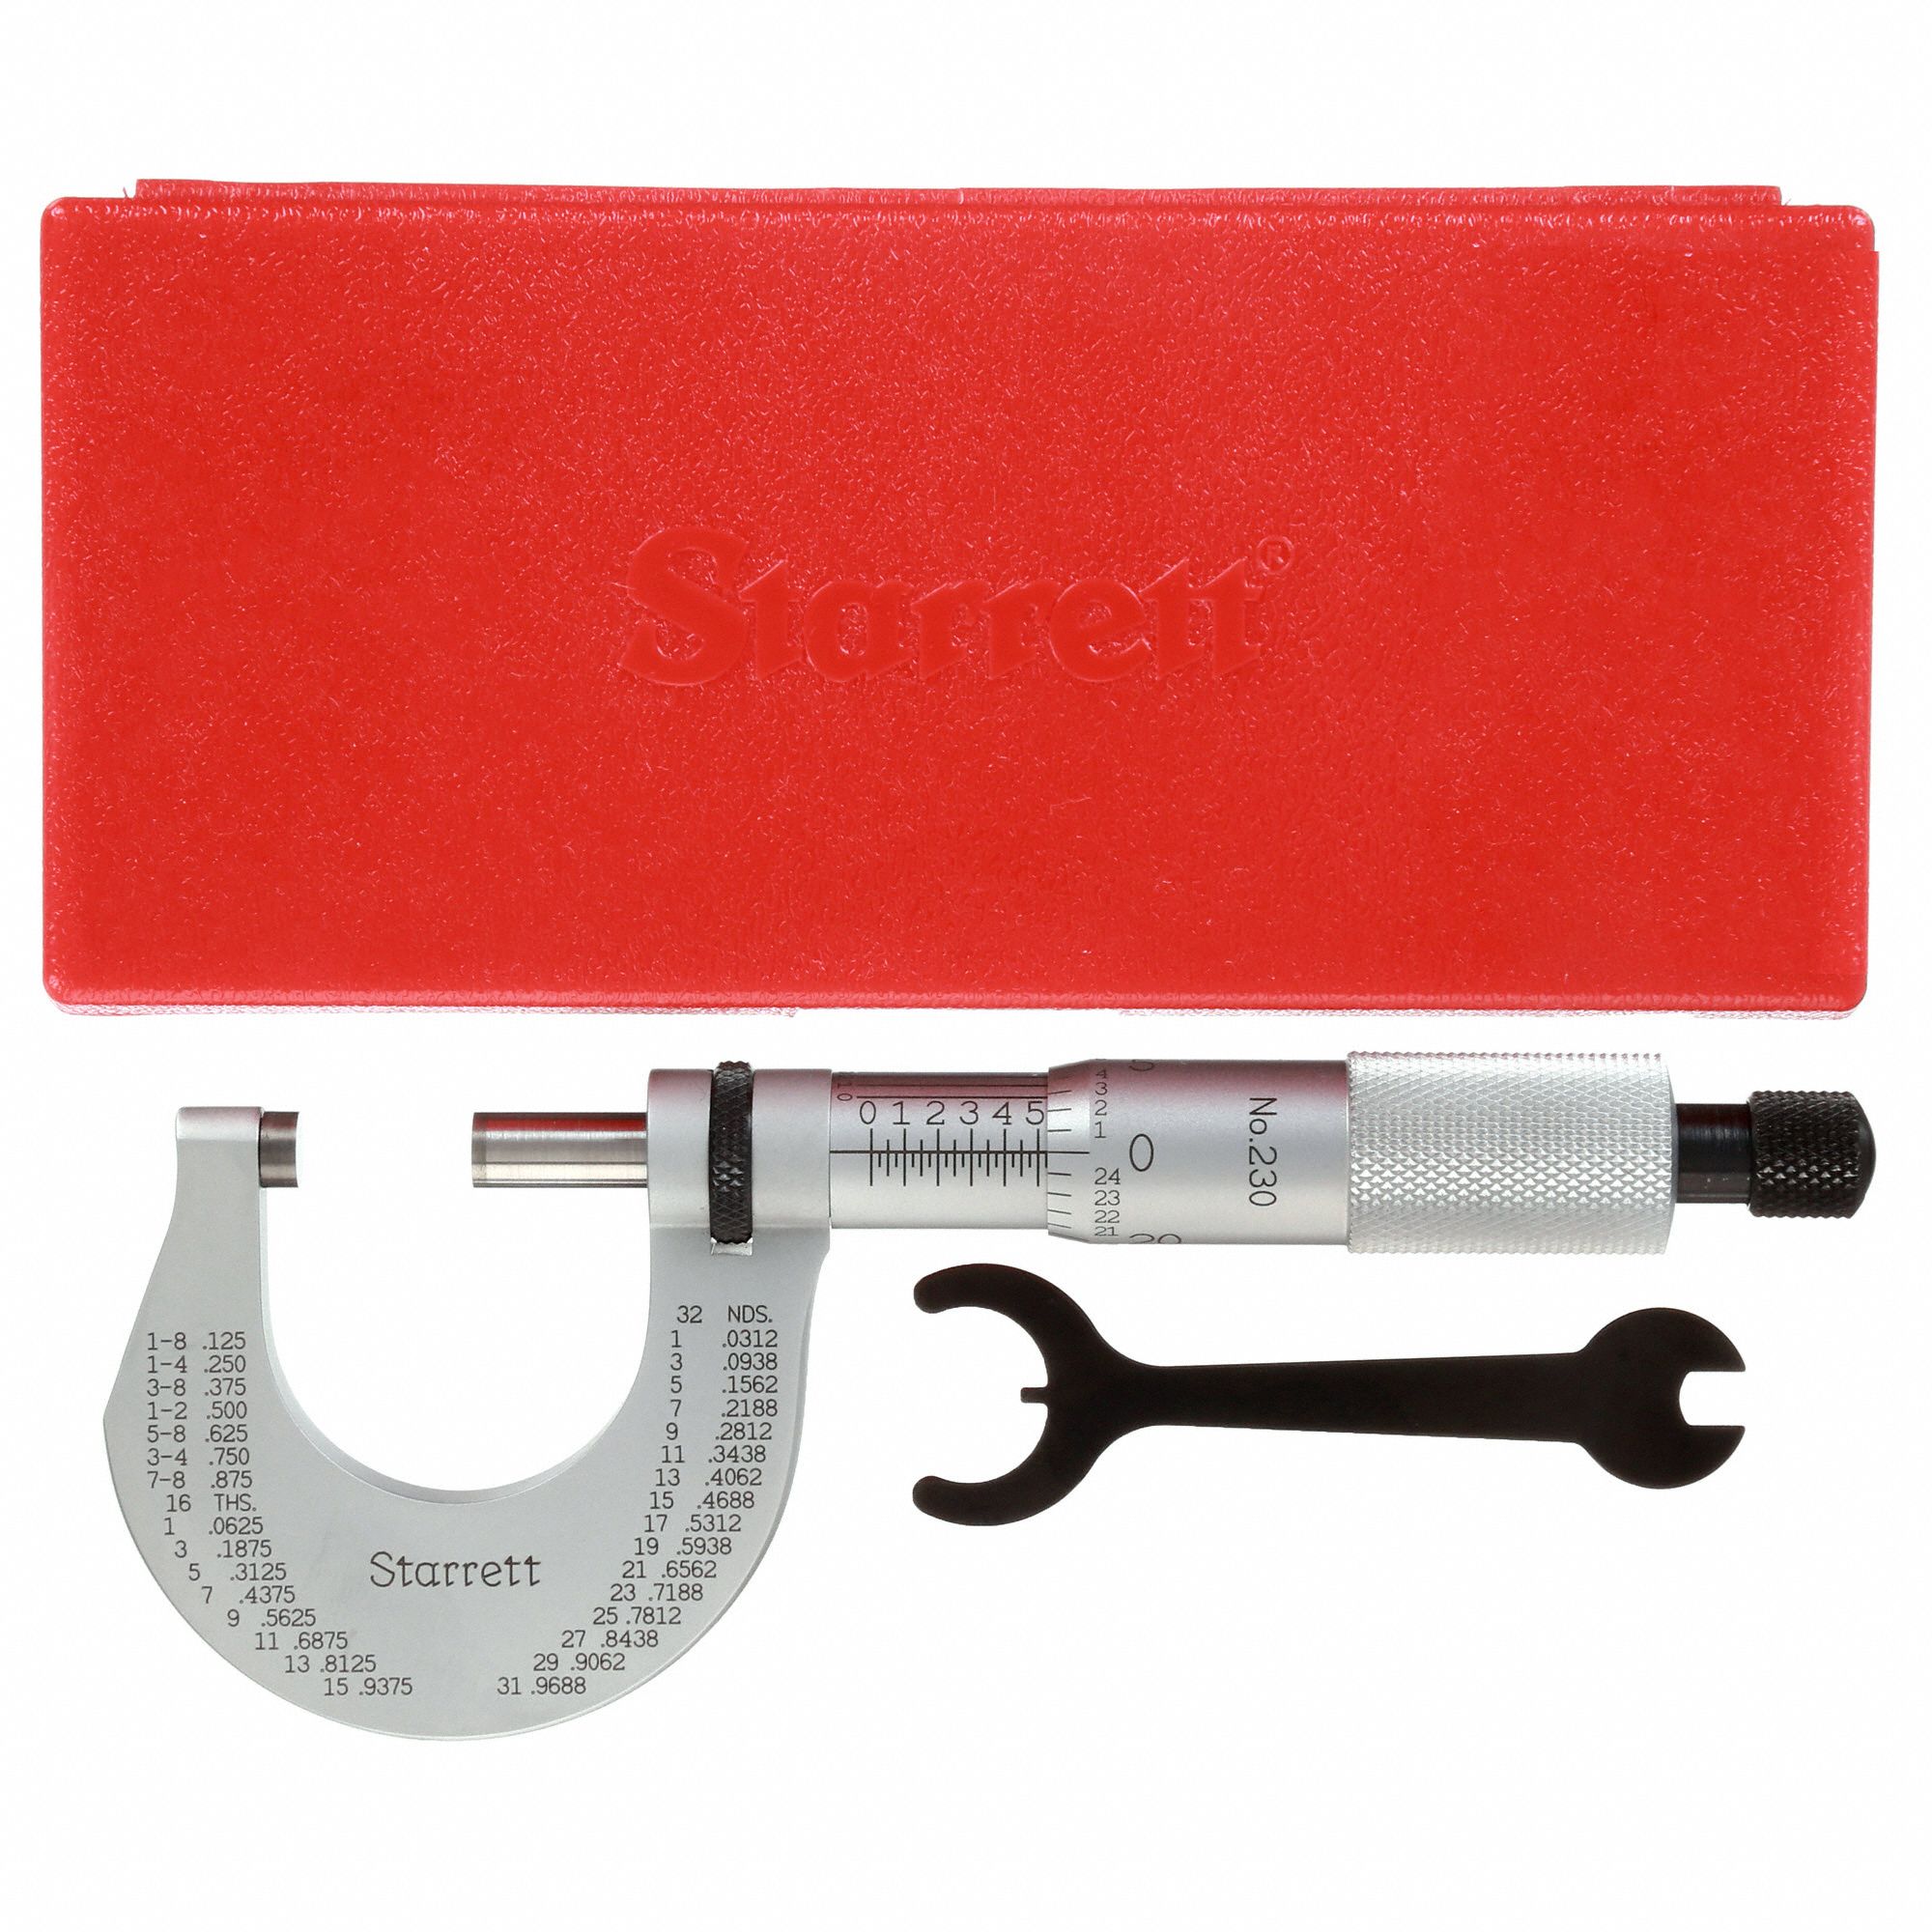 Carbide Faces +/-0.00005 Accuracy Starrett T230XRL W/SLC Outside Micrometer Ratchet Stop With Standard Letter of Certification Lock Nut 0-1 Range 0.0001 Graduation 